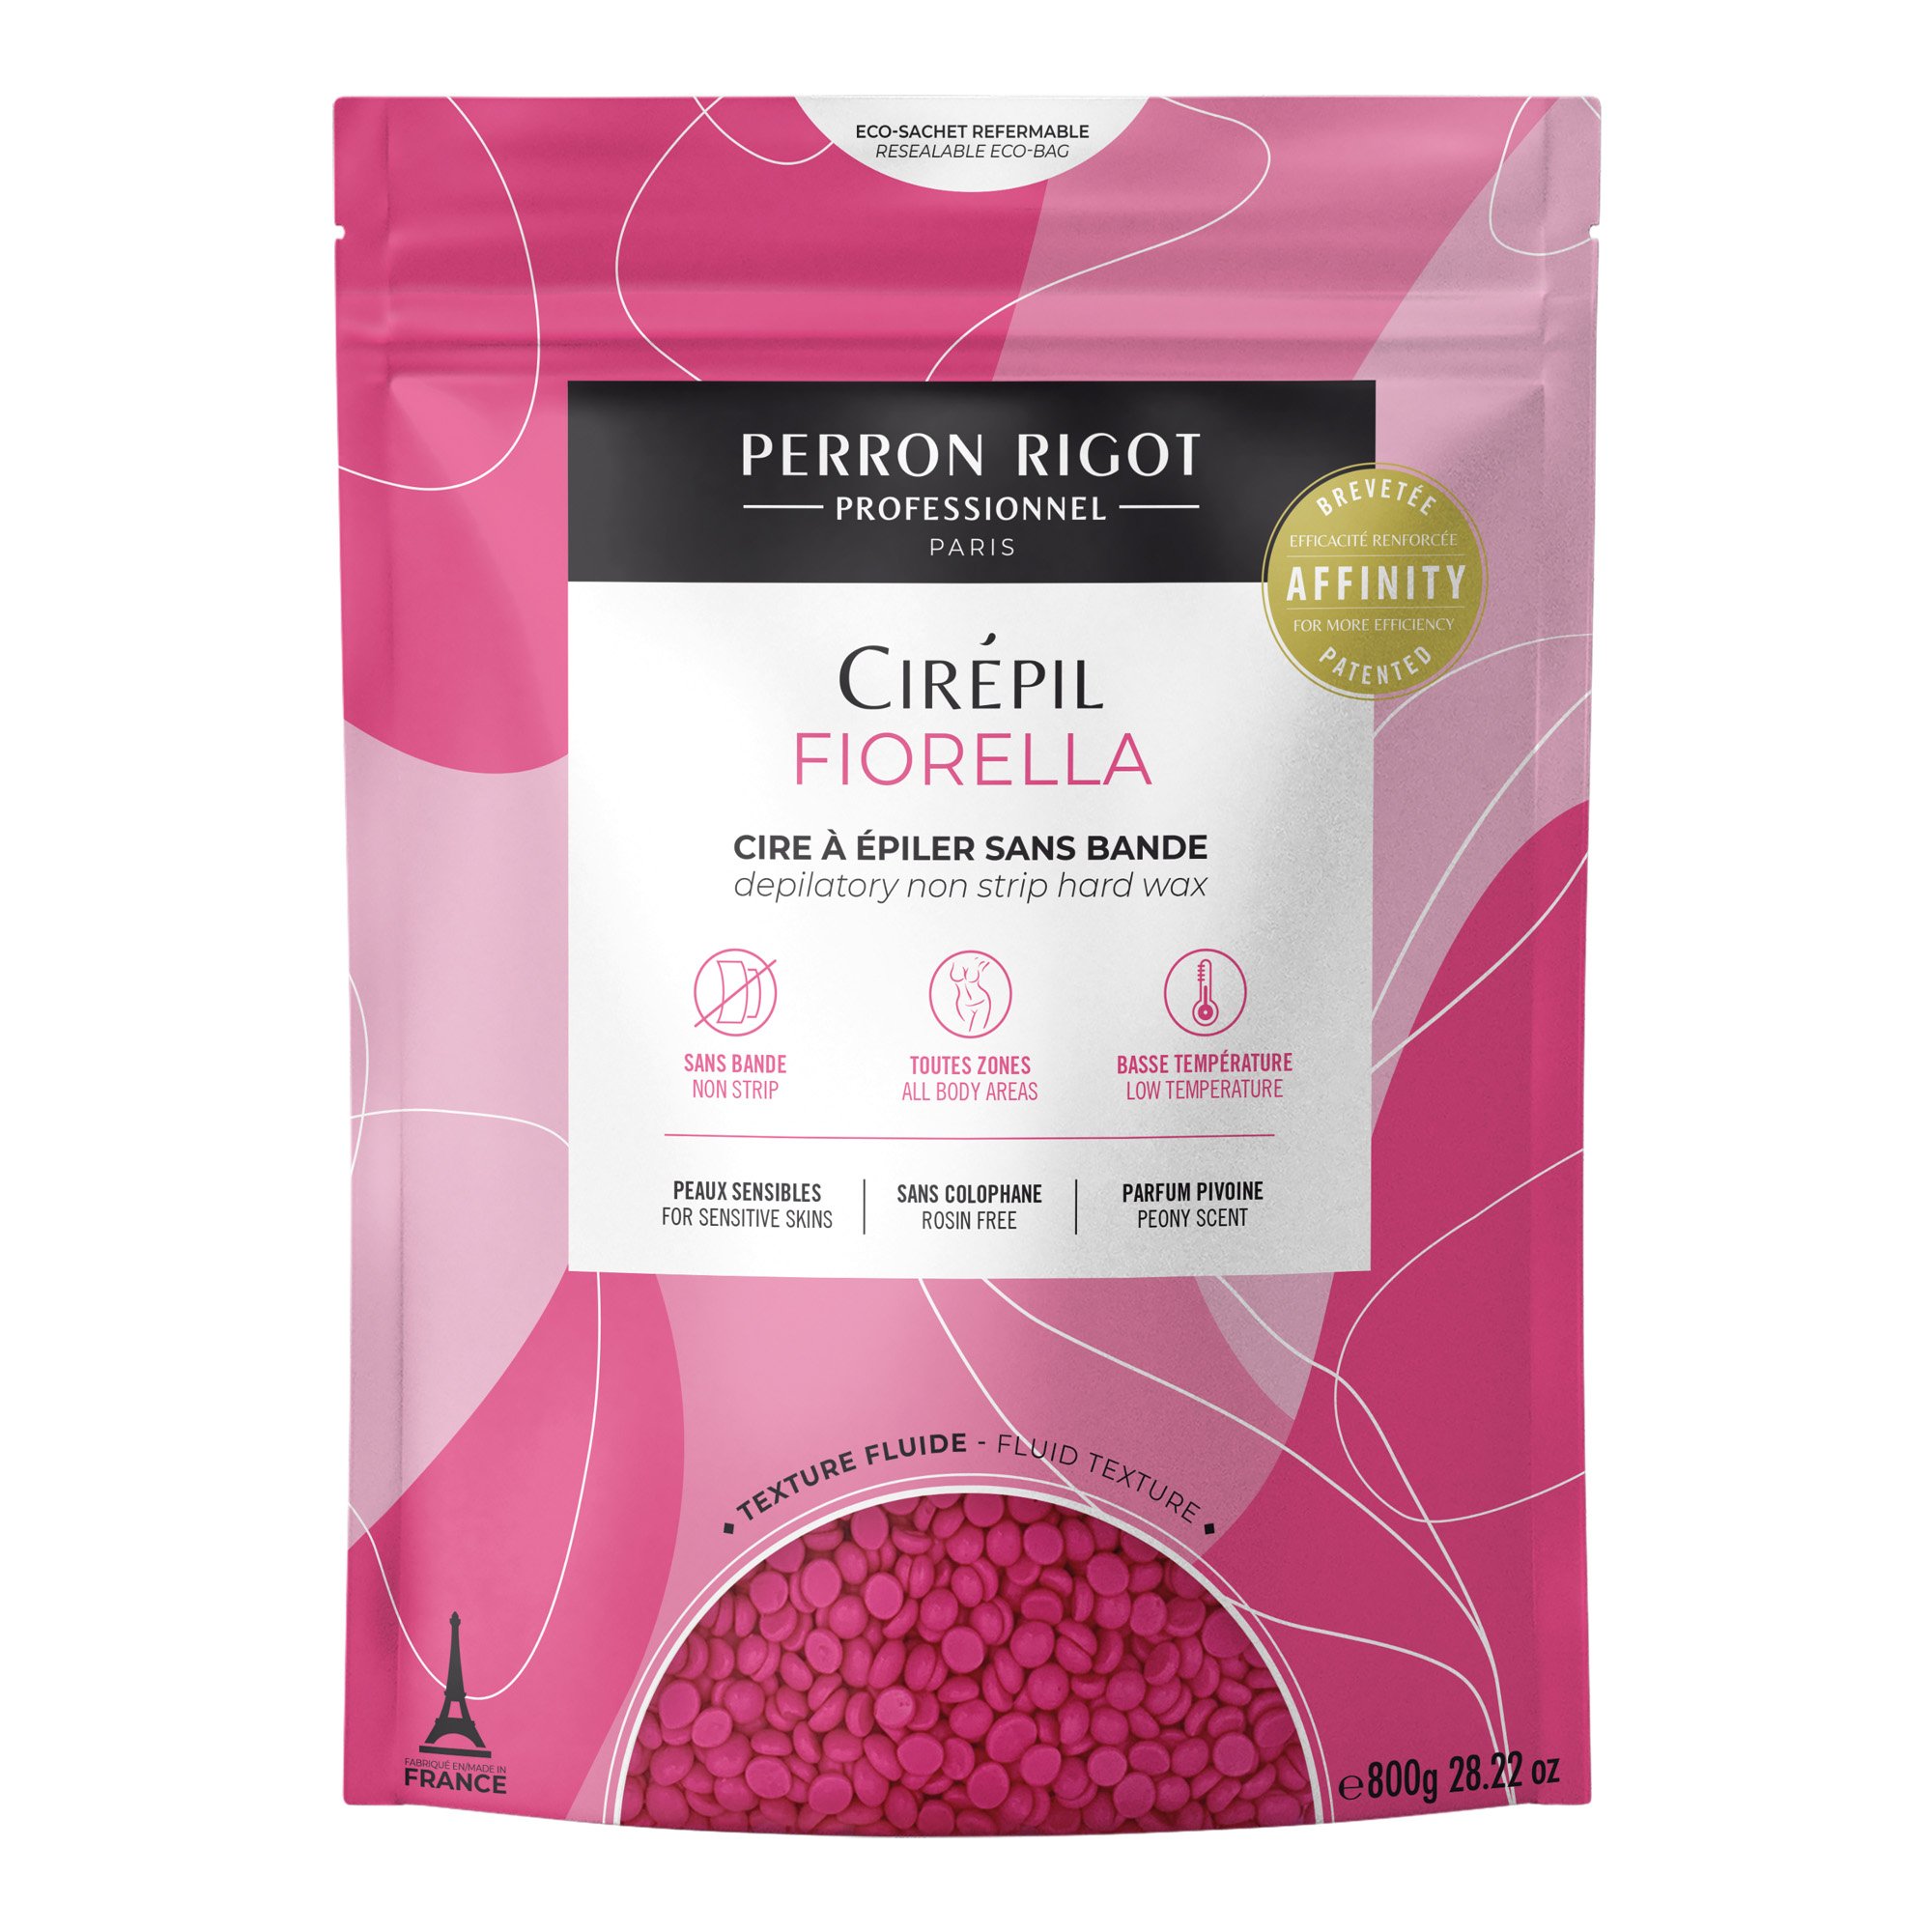 Cirepil Fiorella 800 g - Bead wax without strips for sensitive skin, delicate fragrance